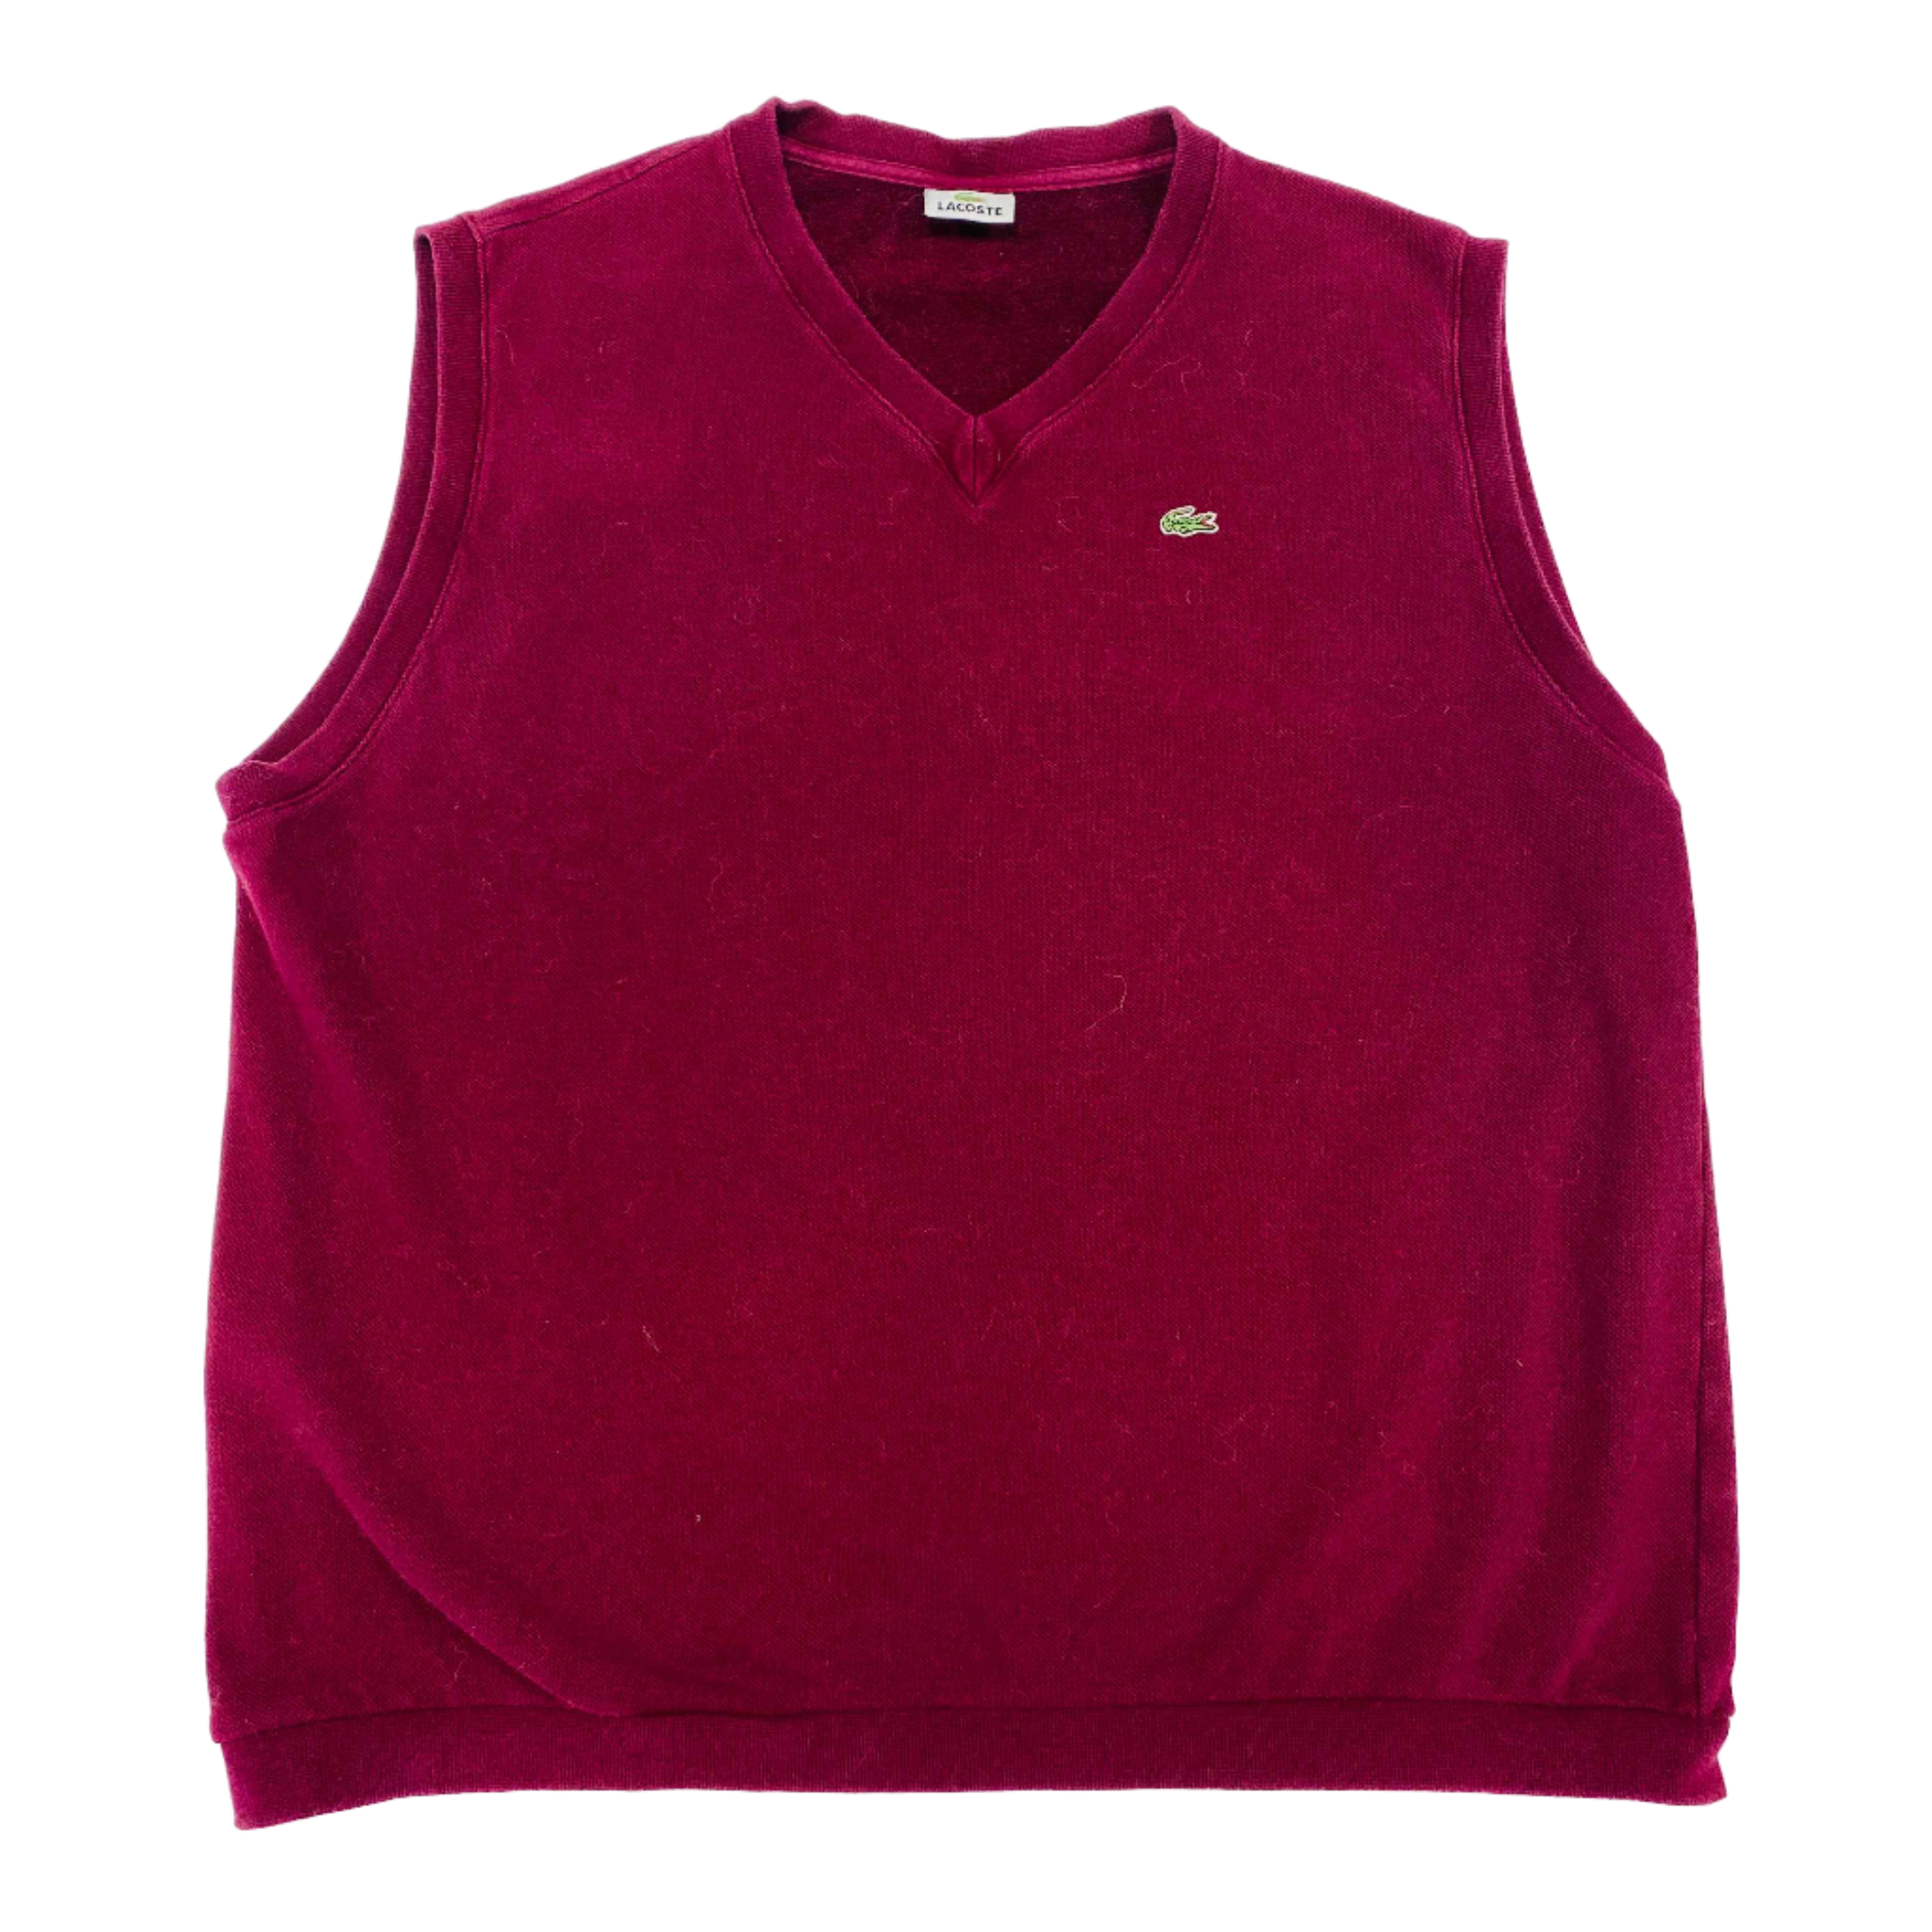 Lacoste Knitted Vest - XL